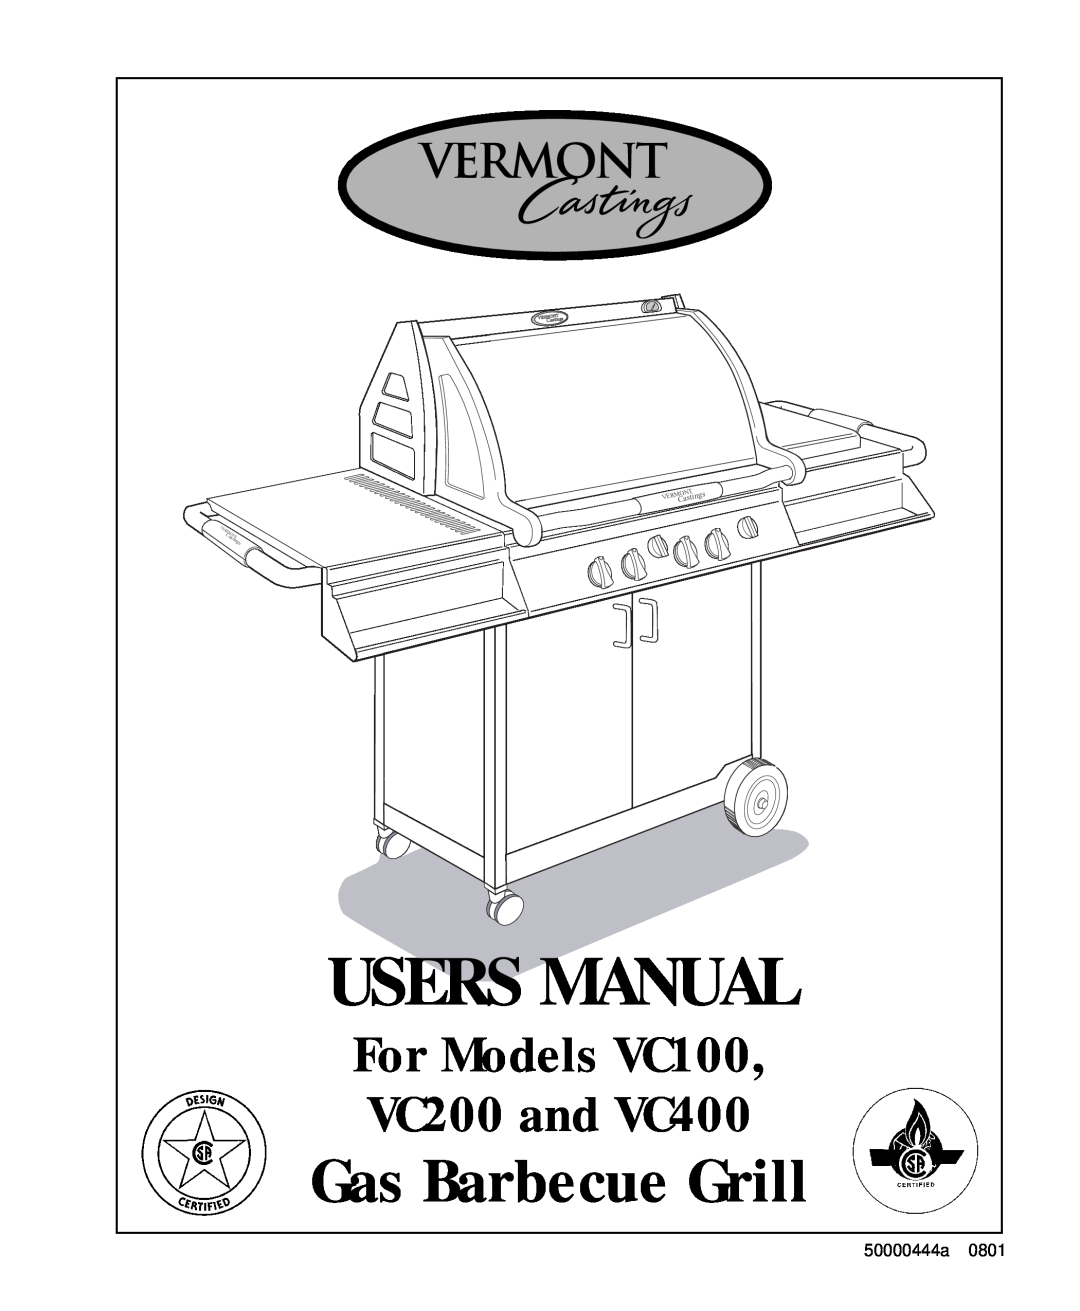 Vermont Casting user manual Gas Barbecue Grill, For Models VC100, VC200 and VC400, 50000444a, 0801, Castings, Vermont 